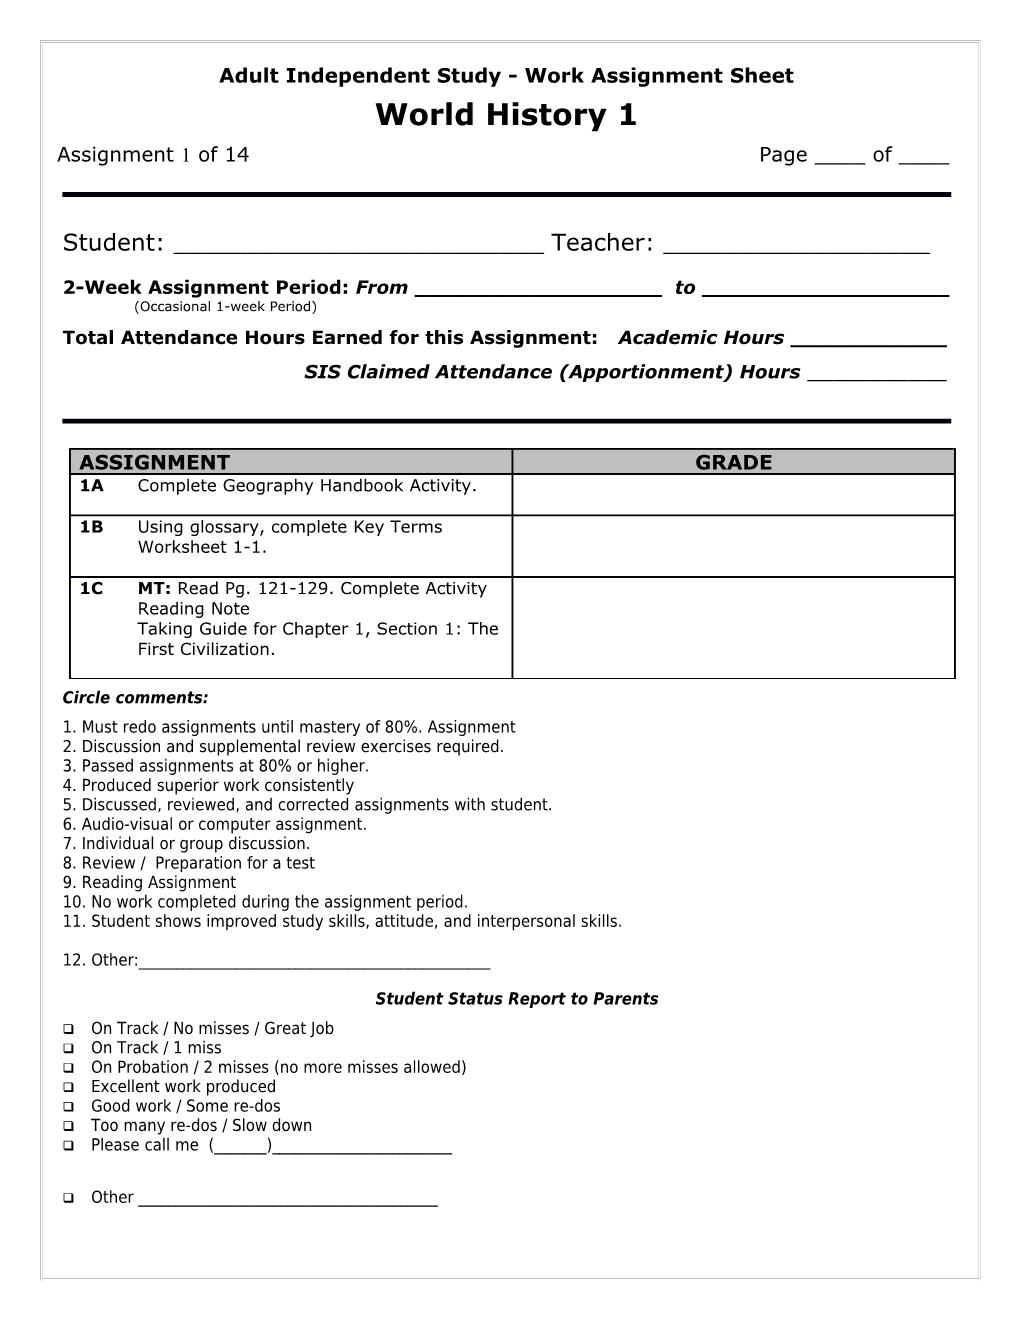 Adult Independent Study - Work Assignment Sheet World History 1